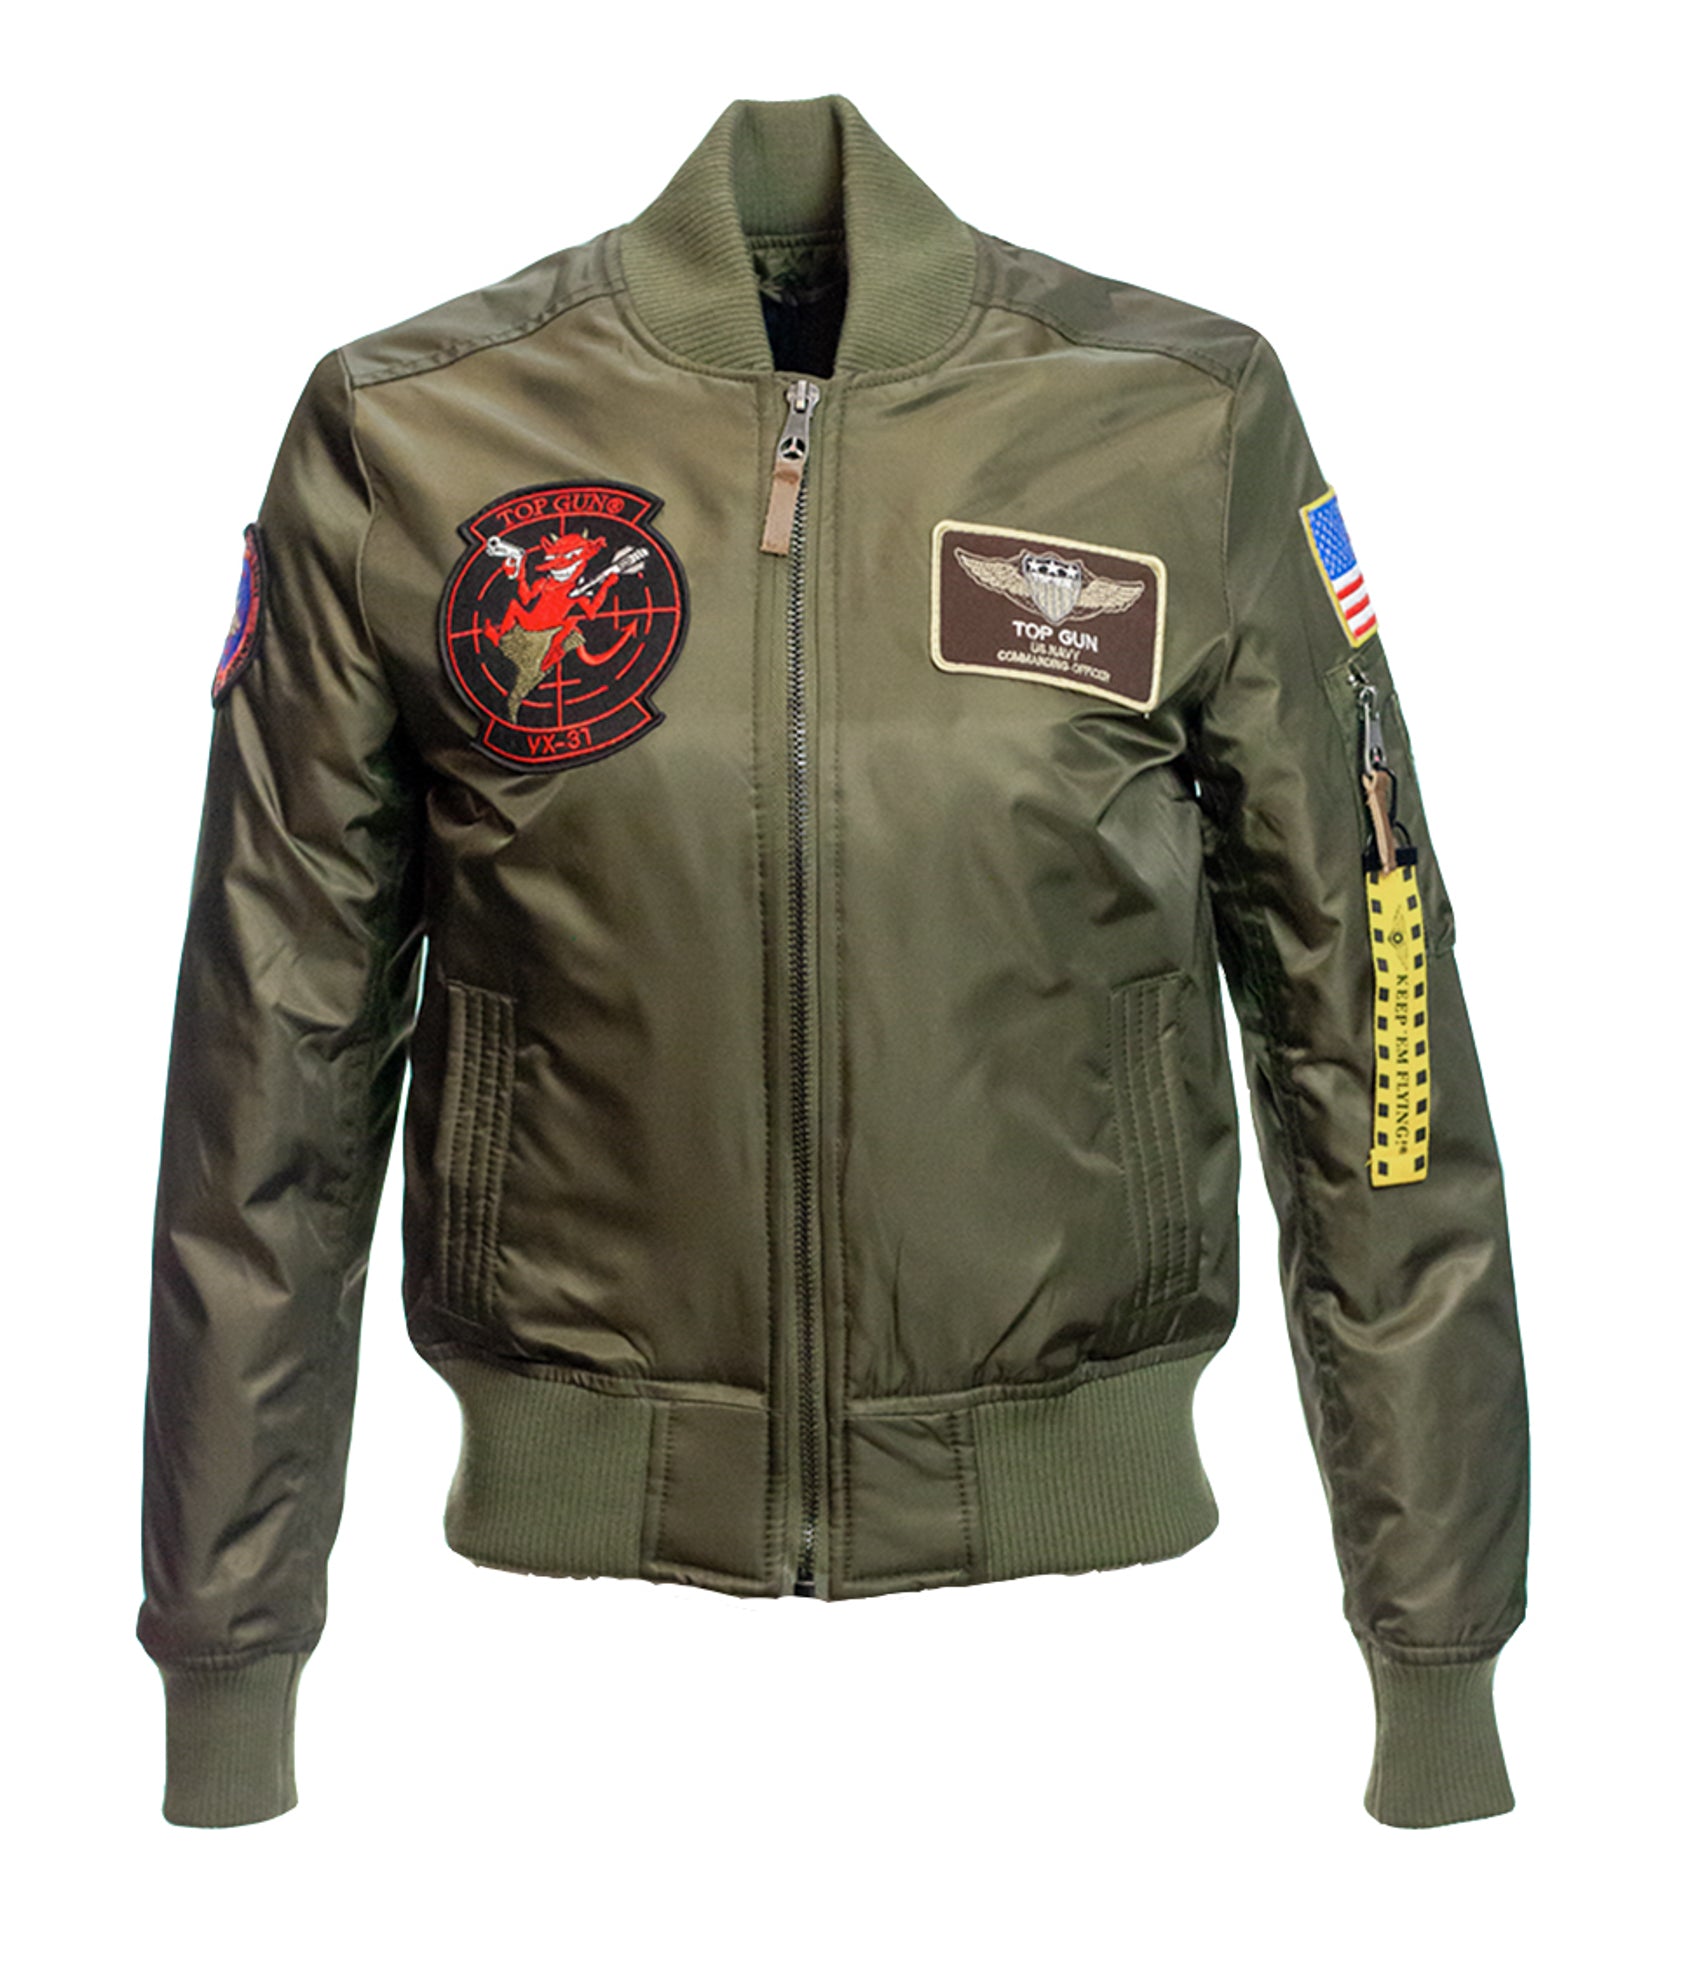 Top Gun MA 1 Nylon Men's Bomber Jacket with Patches Olive